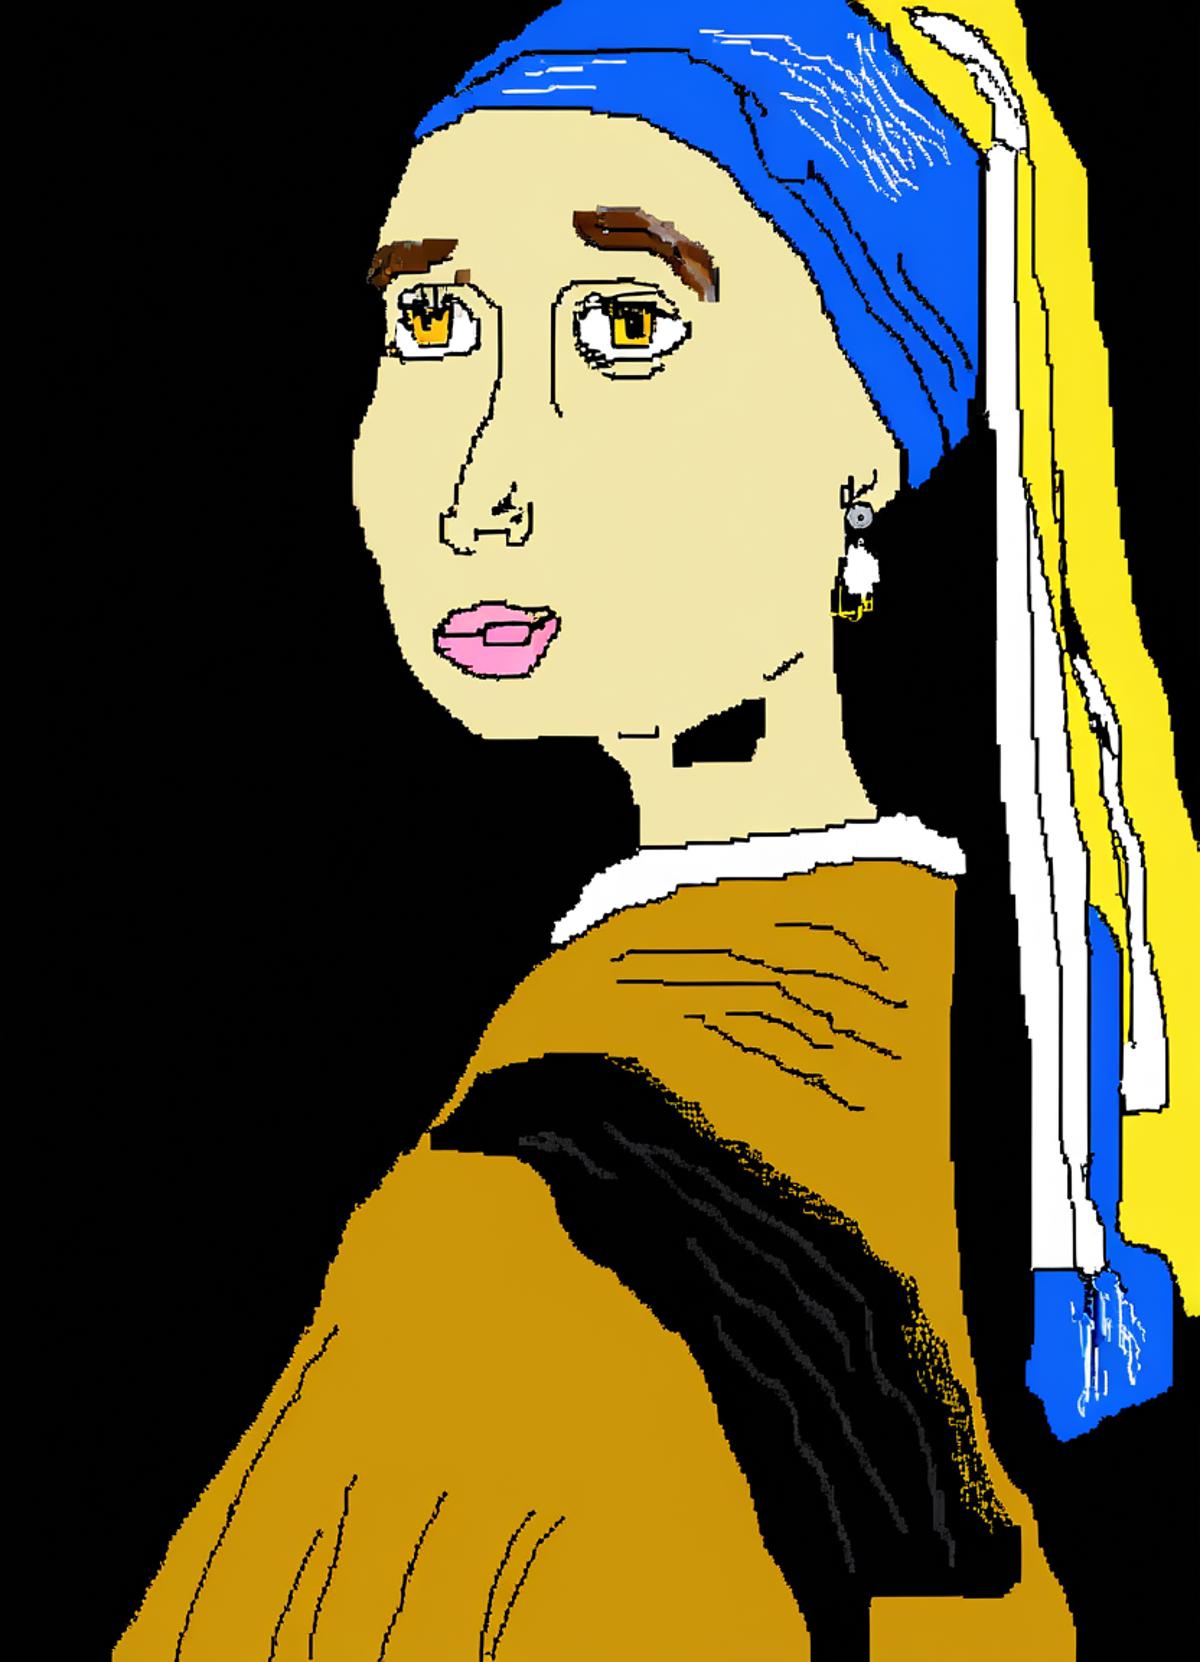 A drawing of a woman with a blue headscarf, earrings, and a yellow shawl.